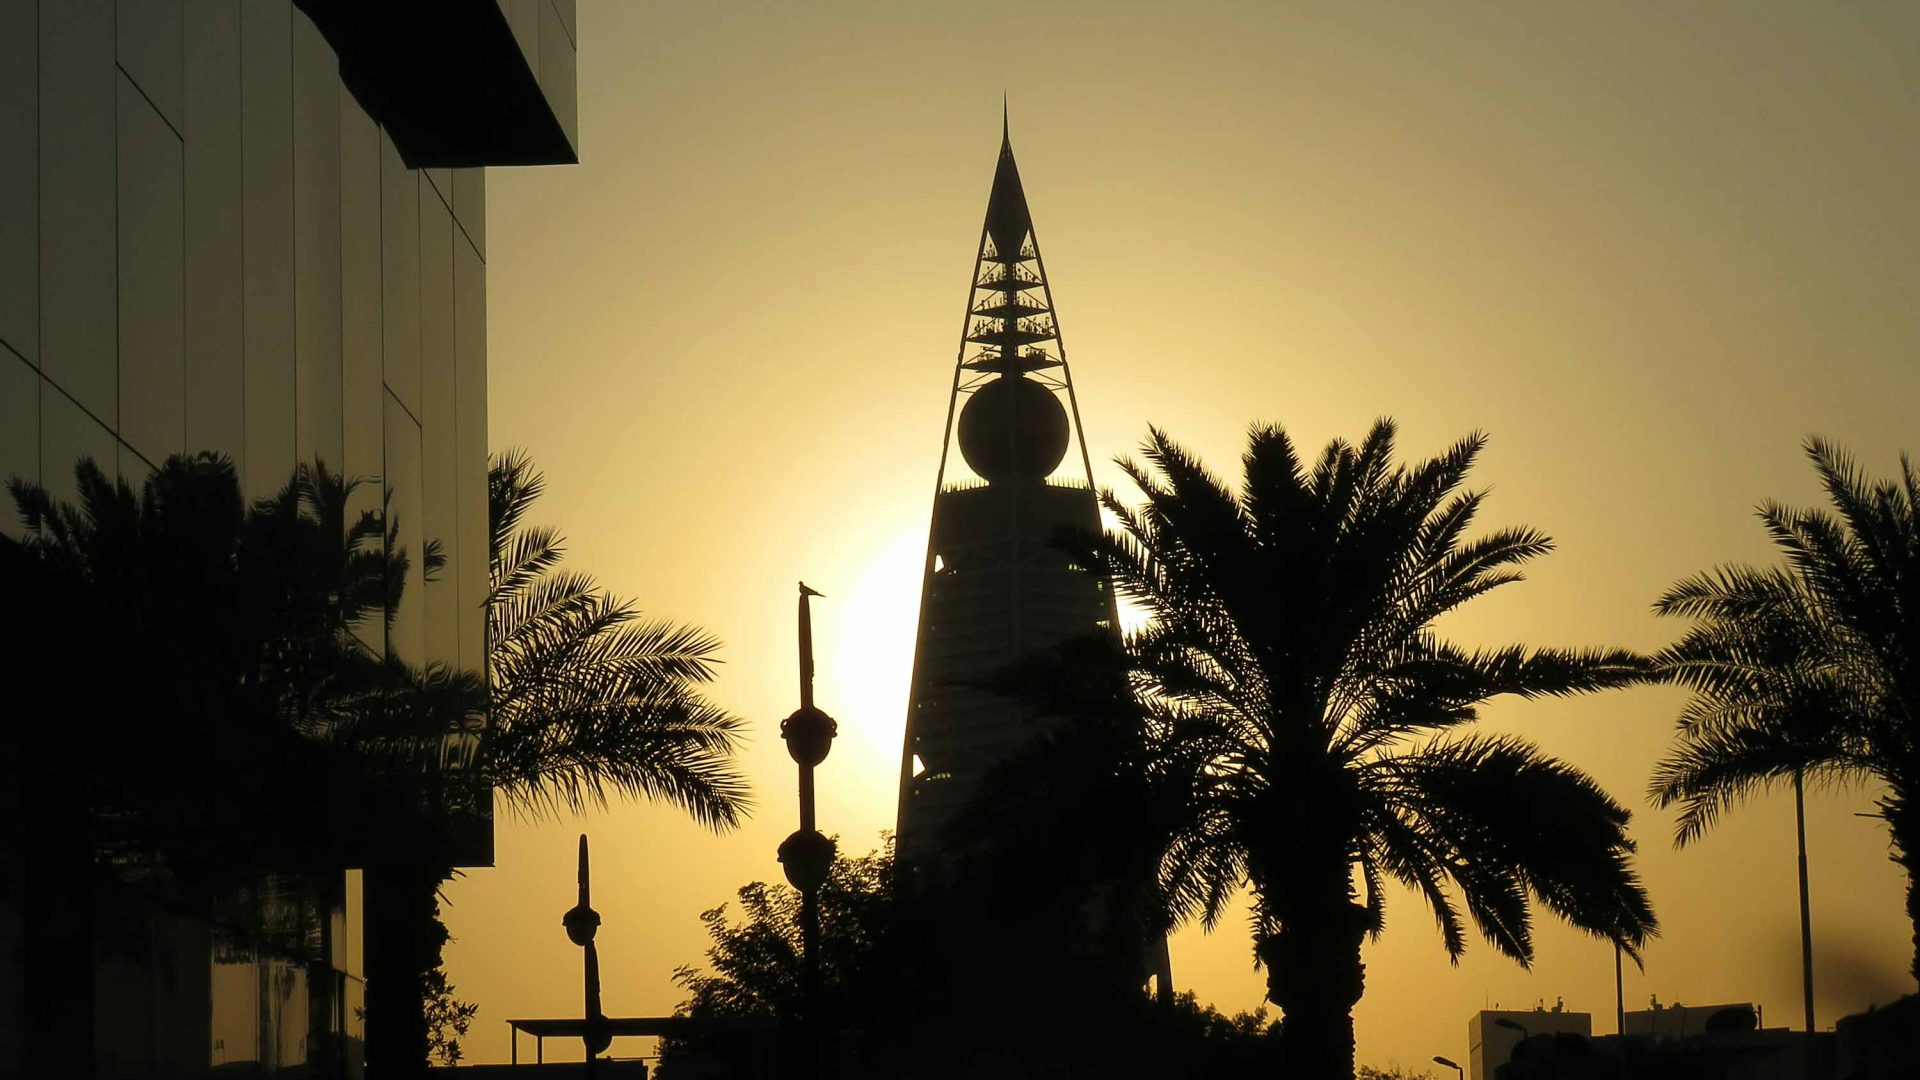 A tower, palm trees and building in silhouette against a yellow sky.